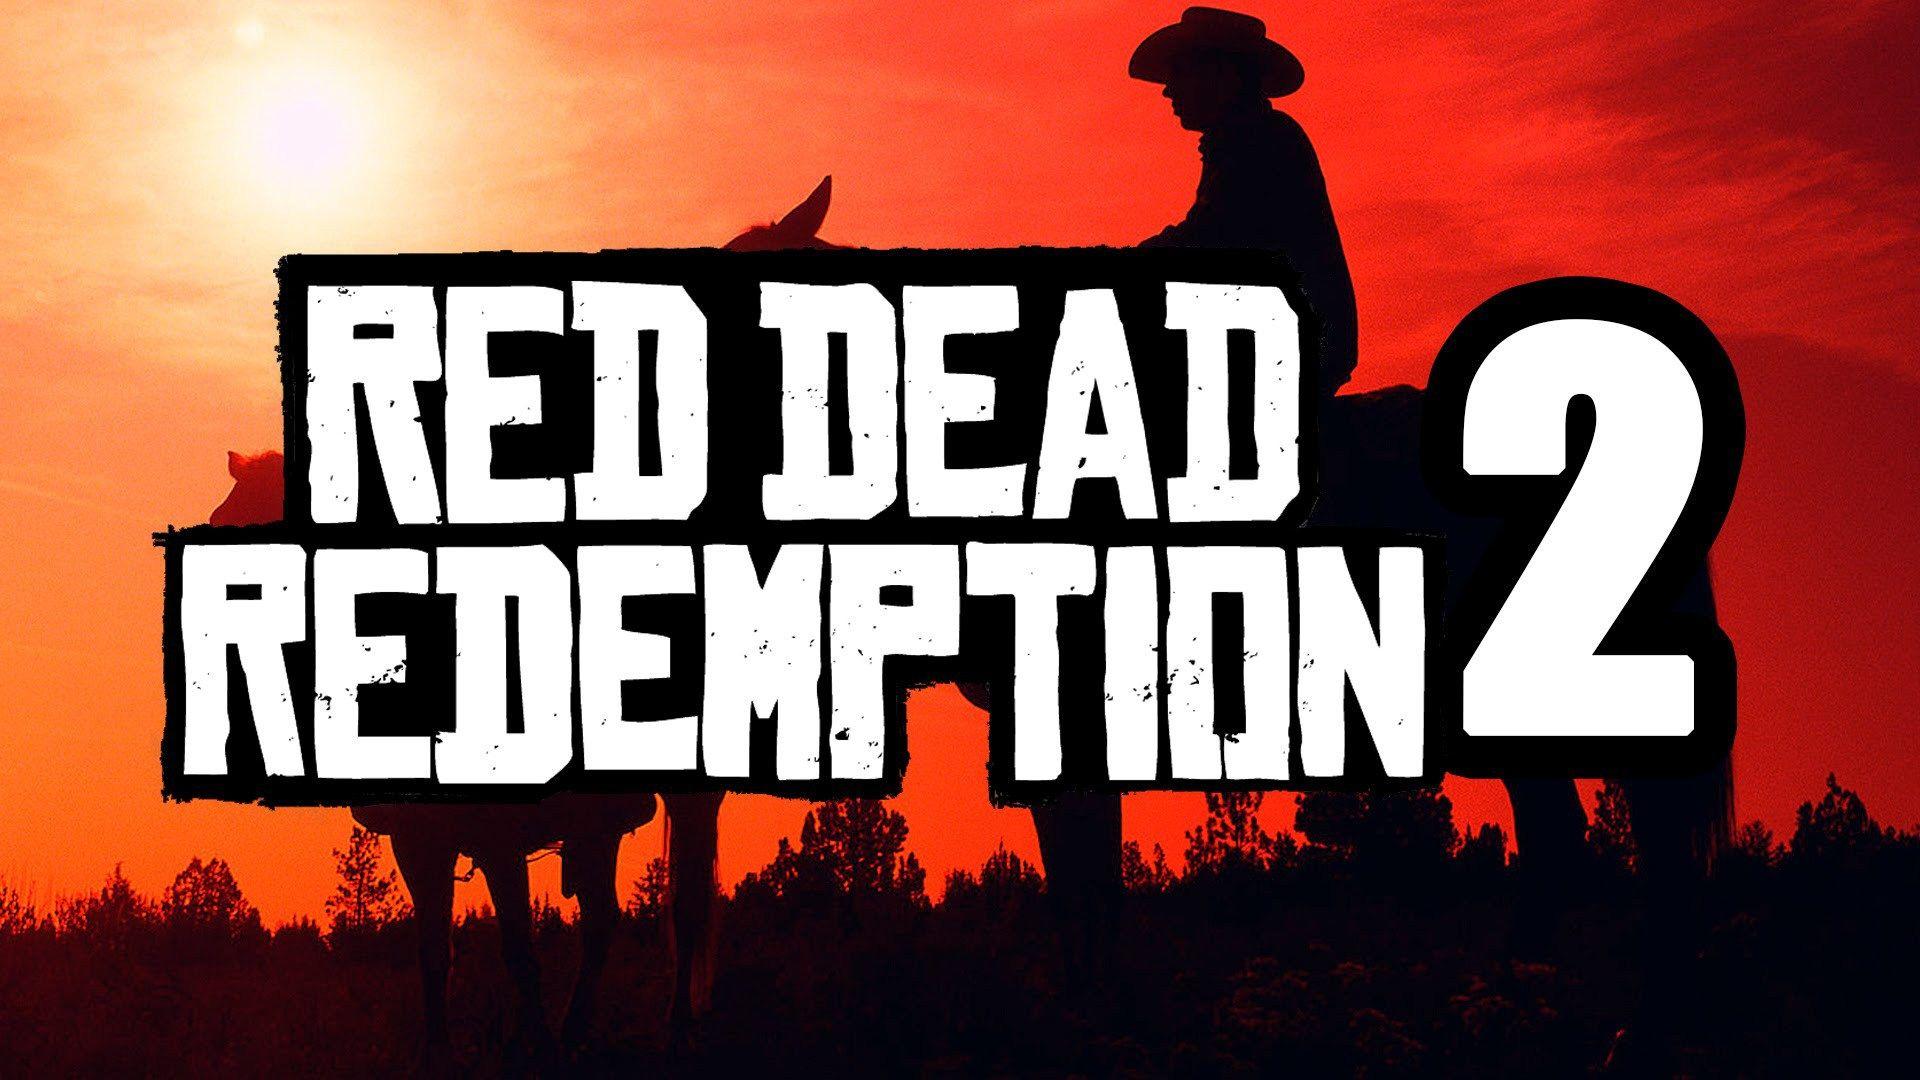 Red Dead Redemption 2 Wallpaper Image Photo Picture Background